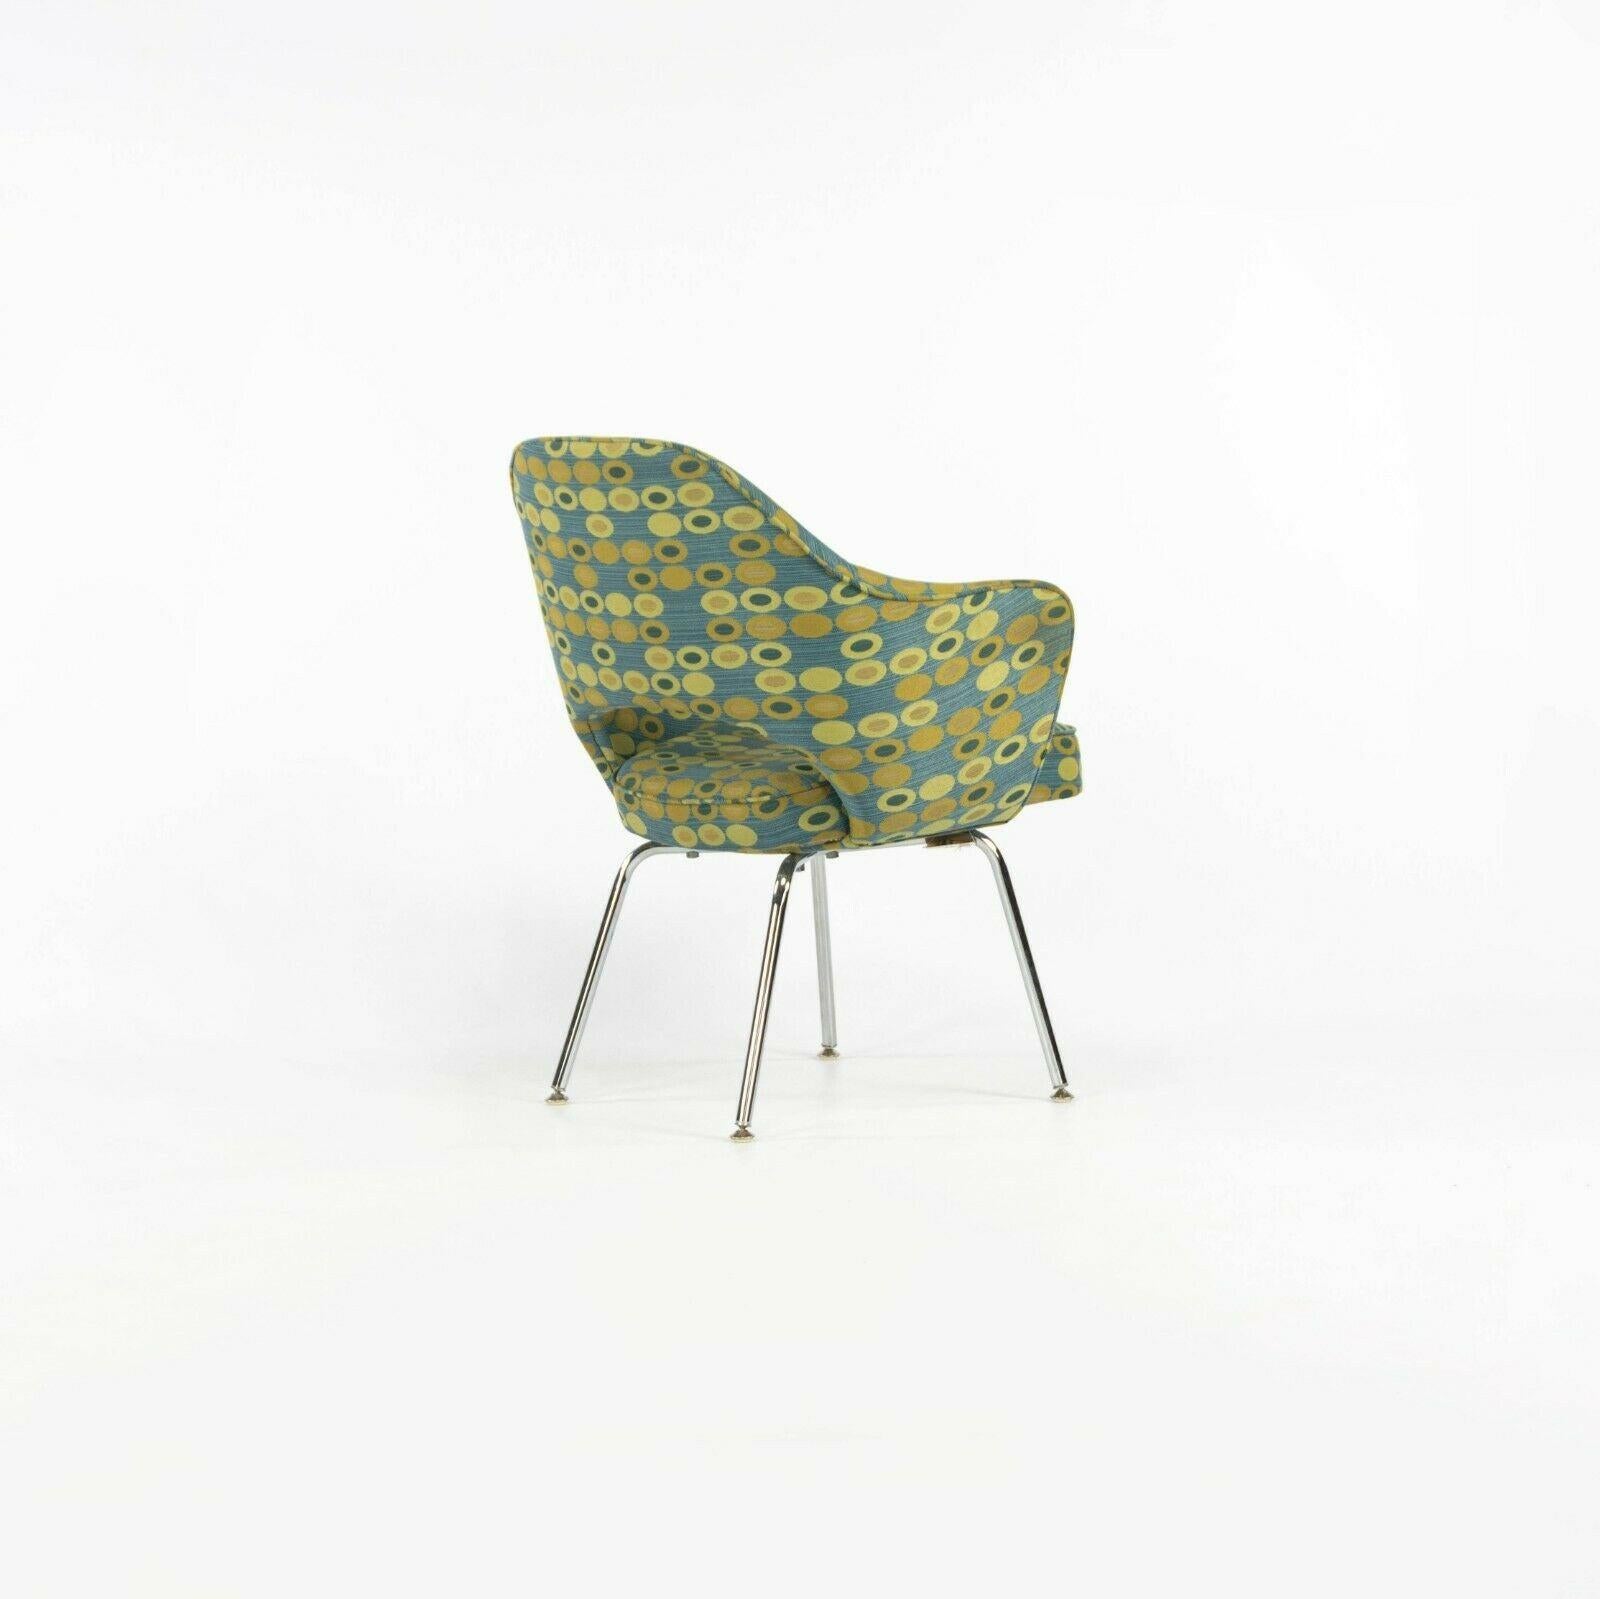 American 2008 Eero Saarinen for Knoll Executive Dining Arm Chair Abacus Fabric For Sale